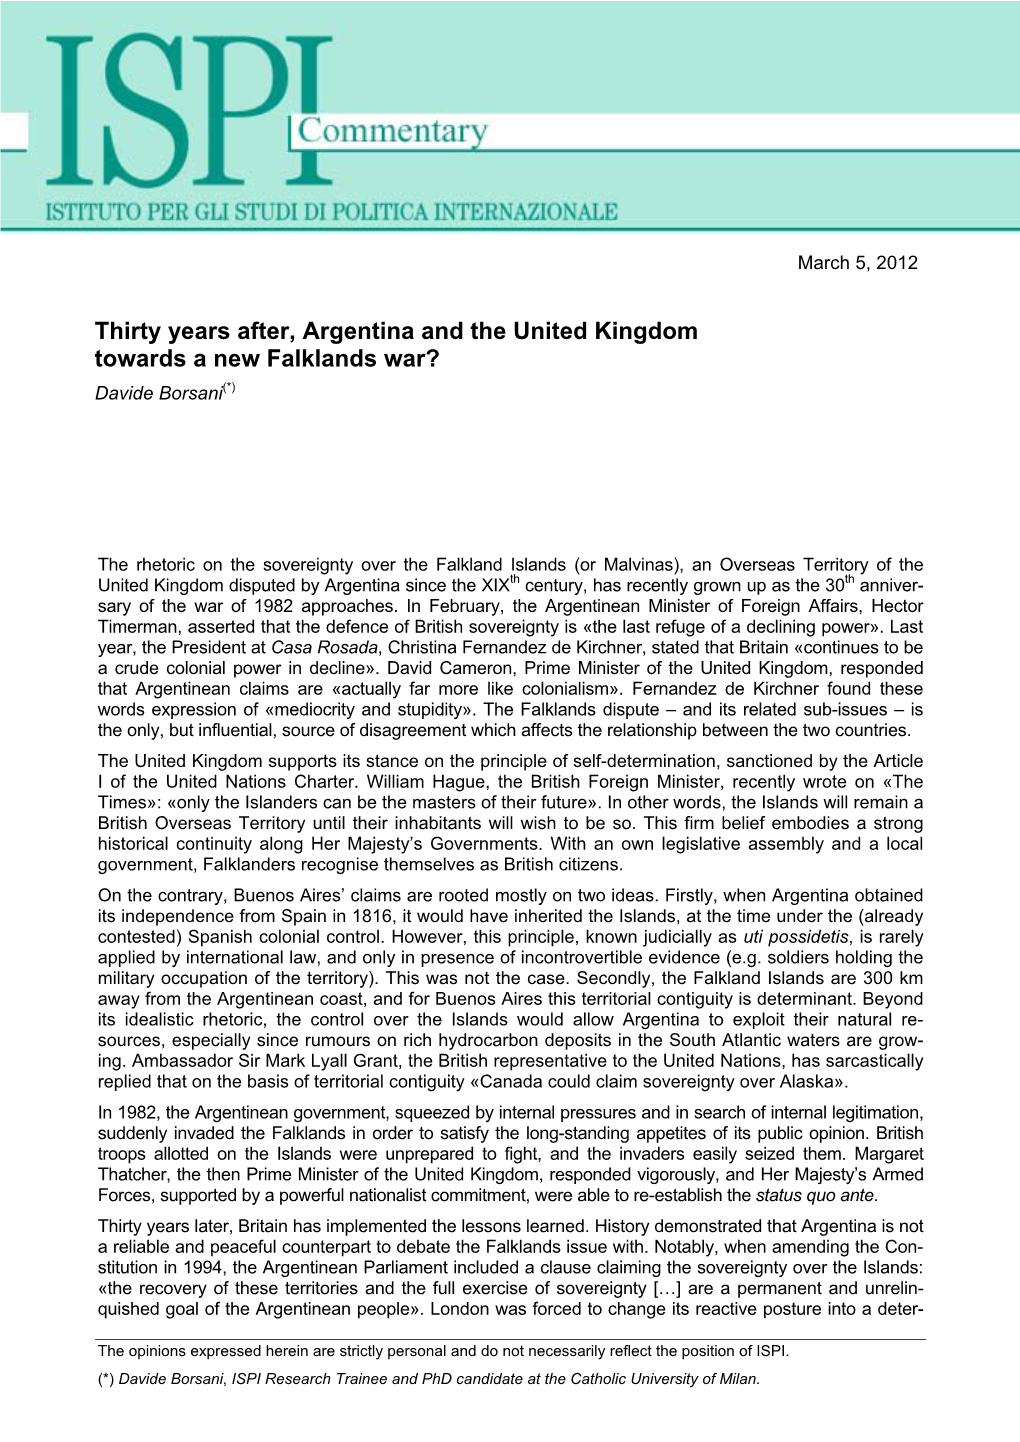 Thirty Years After, Argentina and the United Kingdom Towards a New Falklands War? Davide Borsani(*)